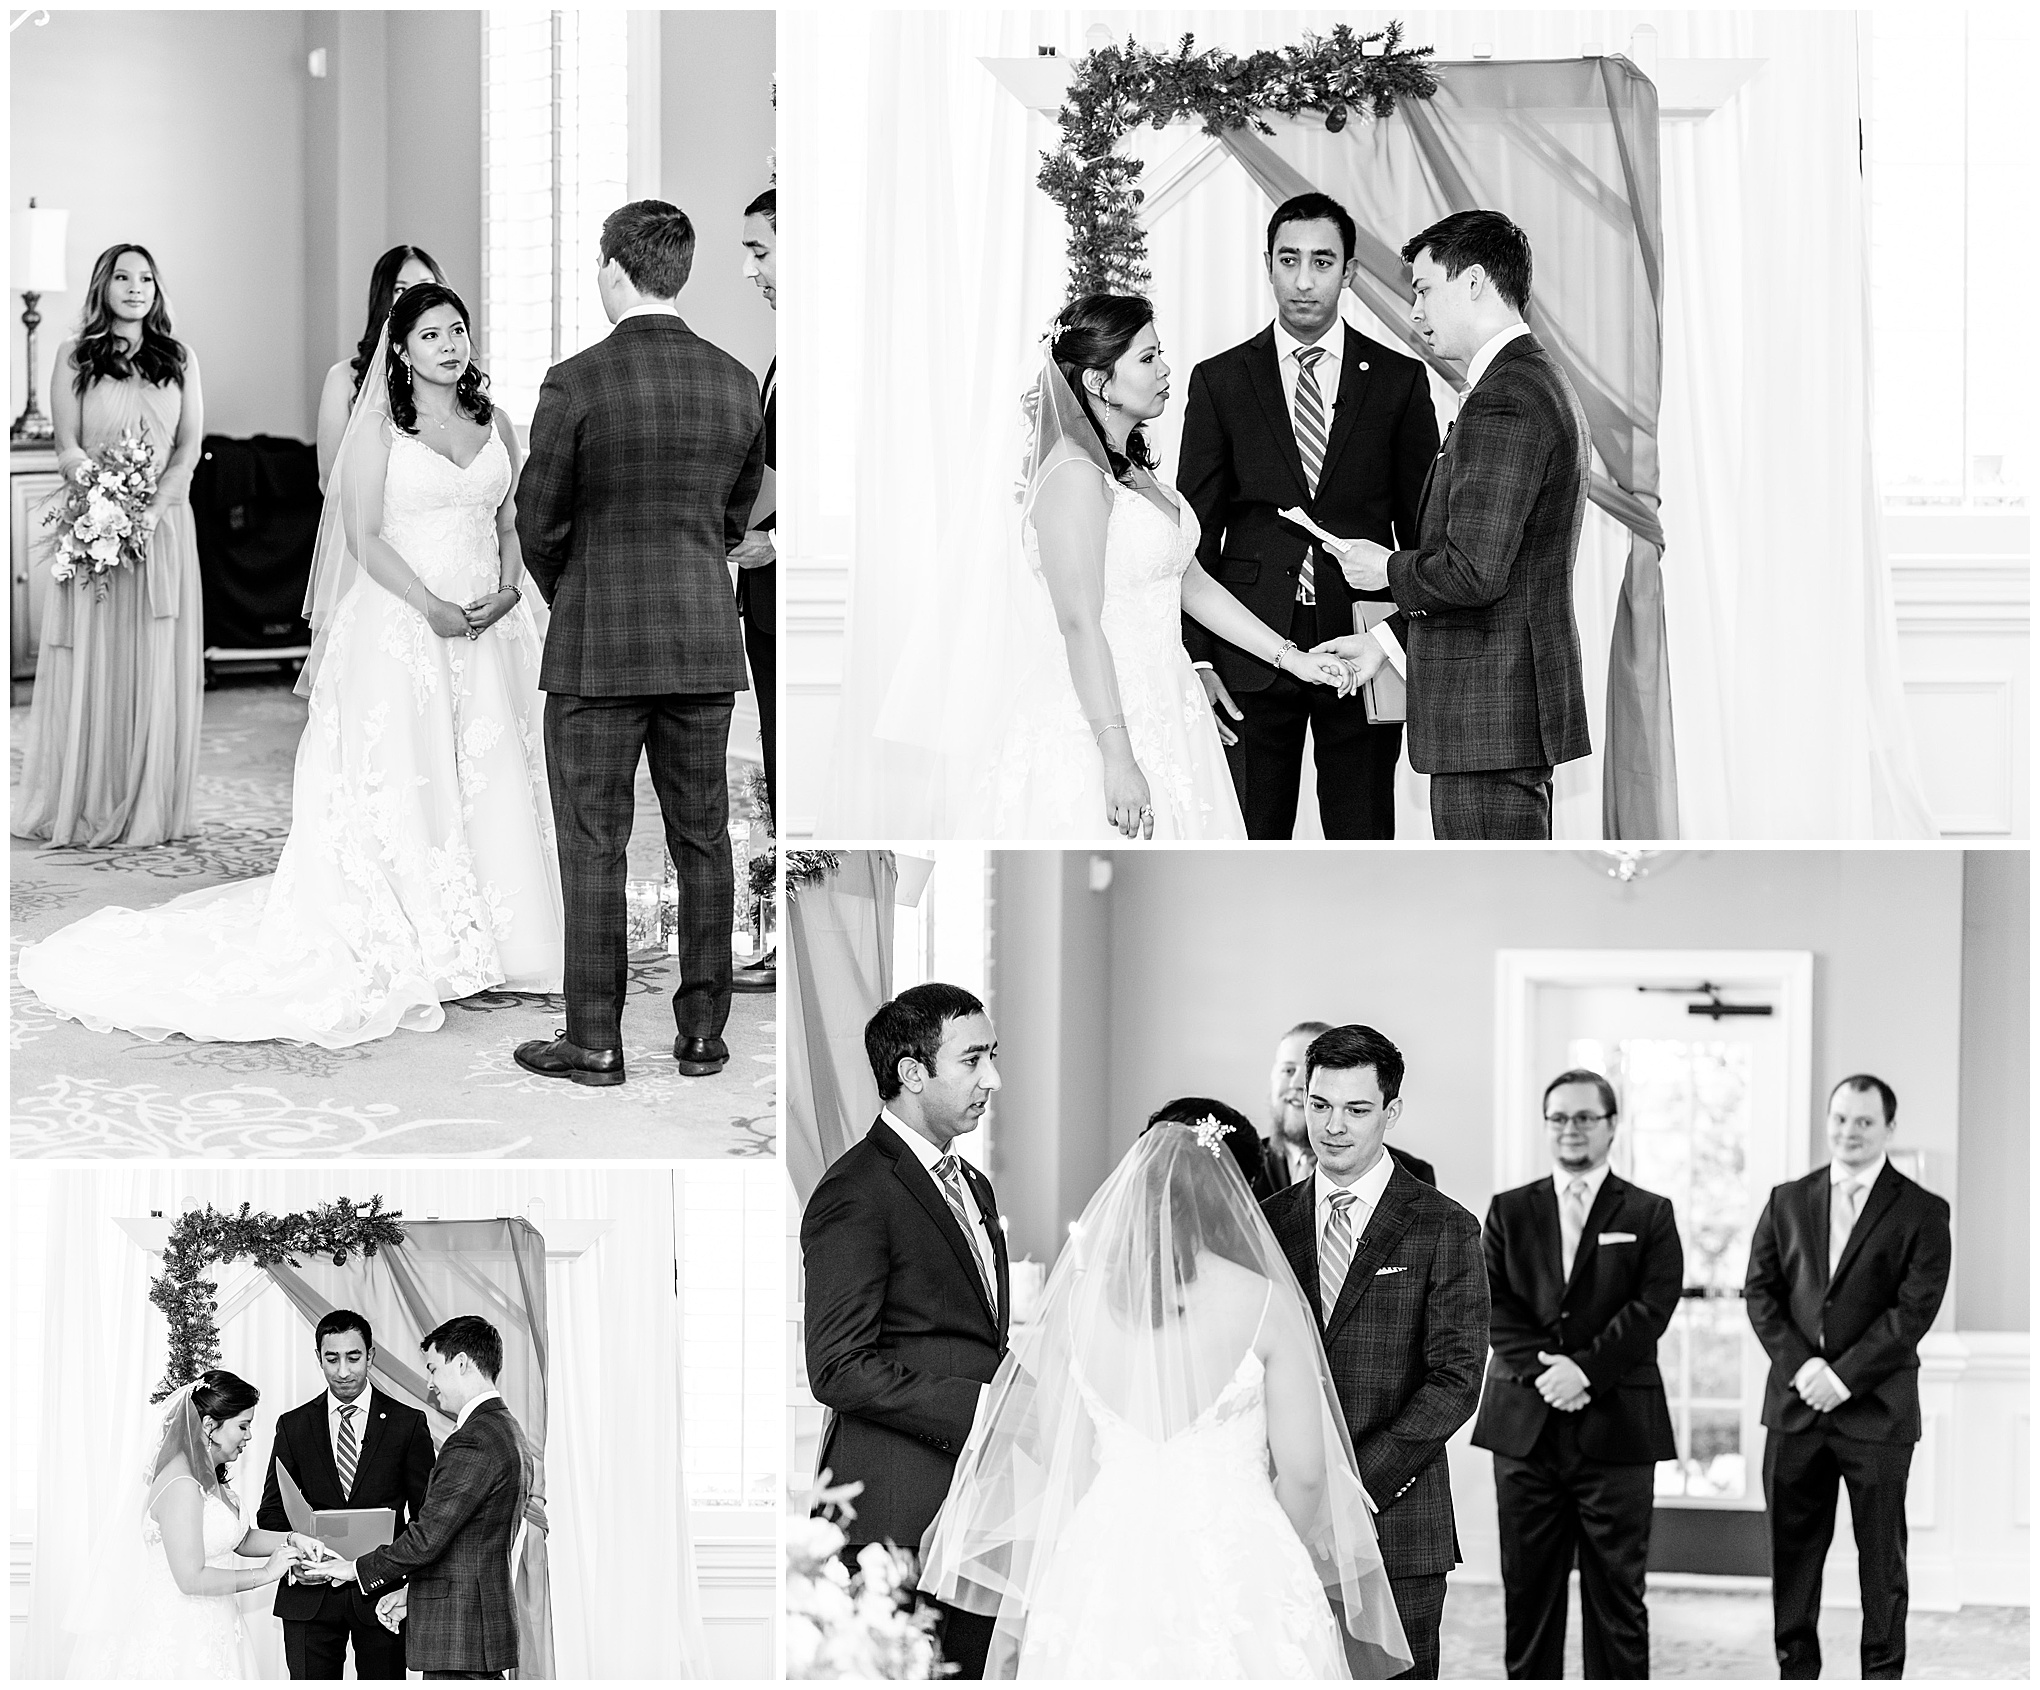 Regency at Dominion Valley wedding, Virginia country club wedding, Haymarket Virginia wedding, northern Virginia wedding, winter wedding, winter wedding aesthetic, DC micro wedding, northern Virginia wedding venues, classic winter wedding, Rachel E.H. Photography, black and white, groom reading vows, bride and groom putting on rings